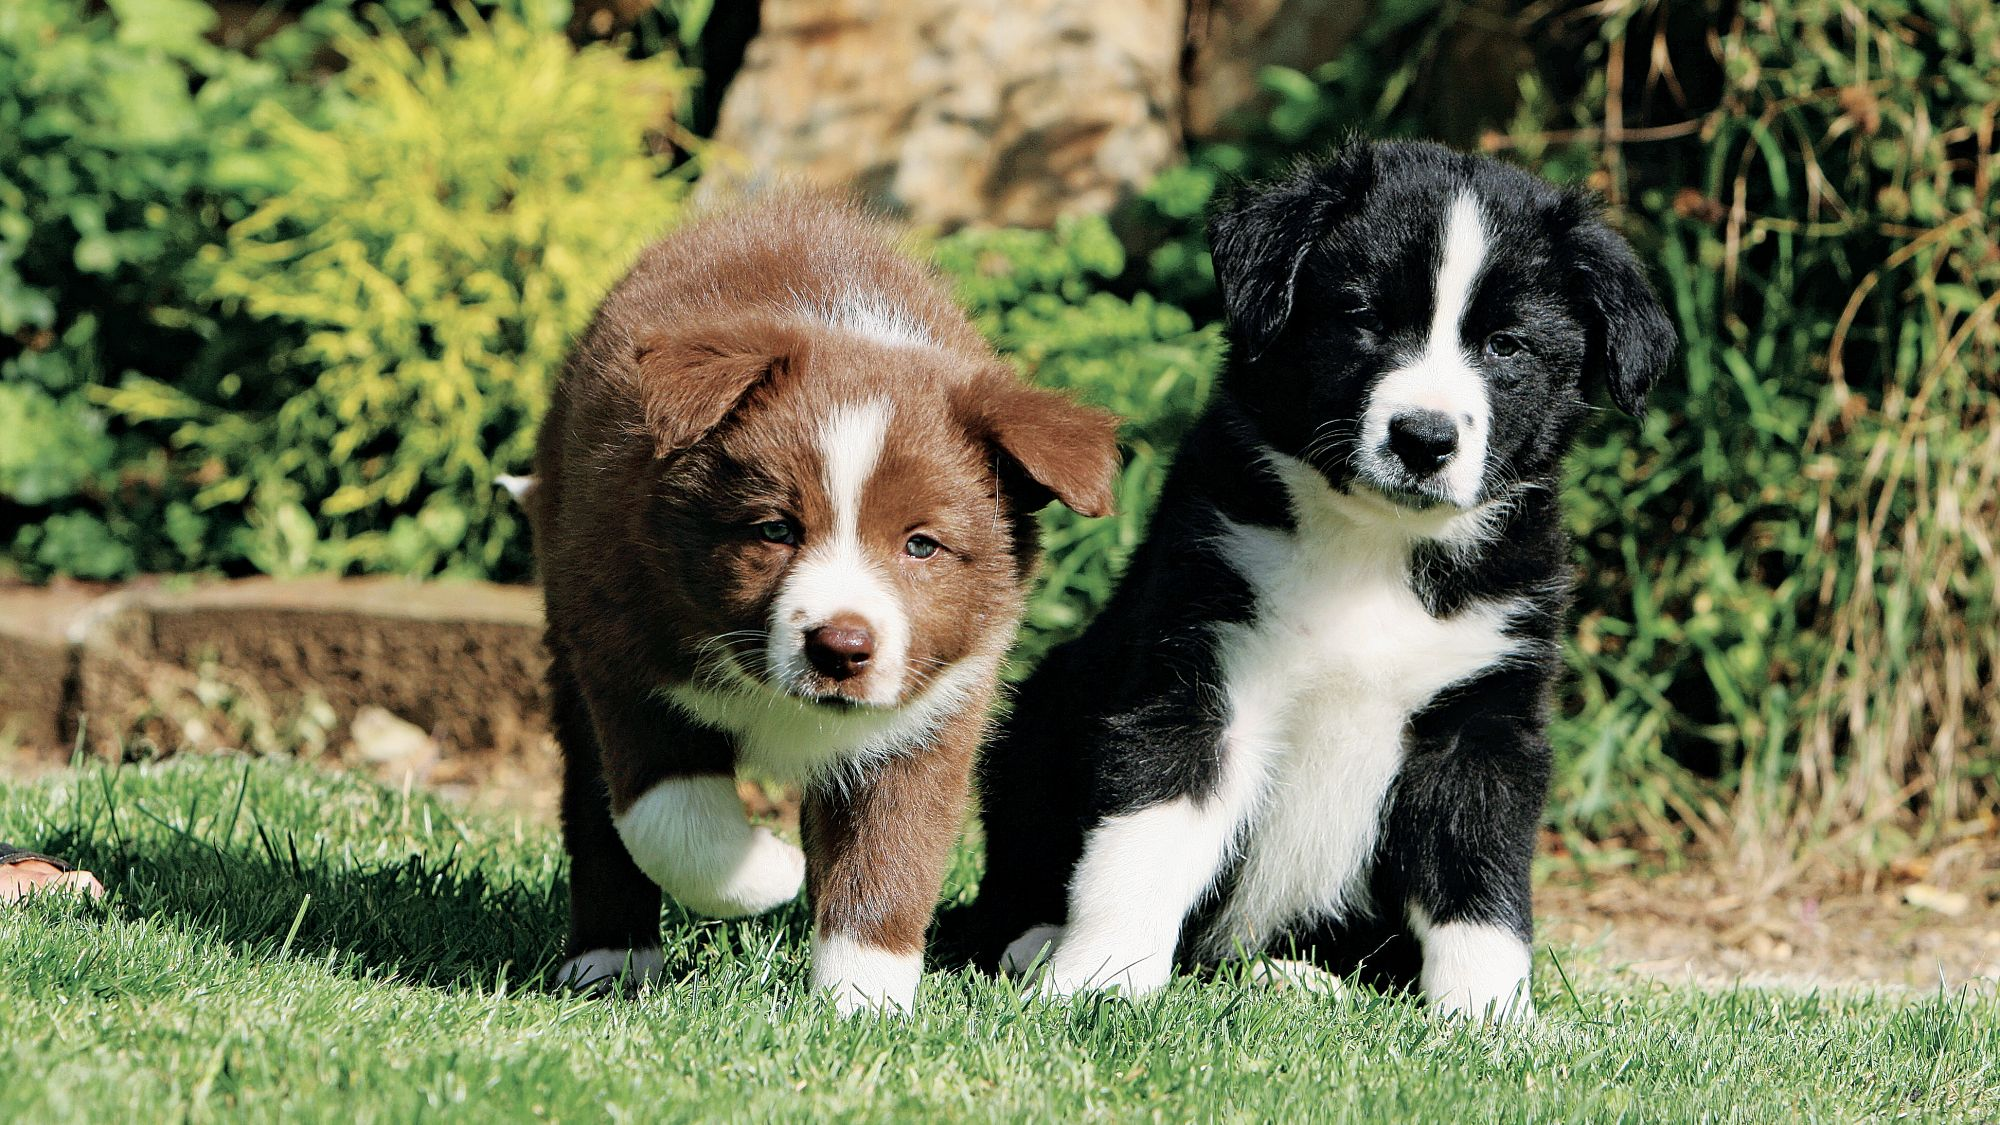 One chocolate and one black Border Collie puppies sat side by side on grass